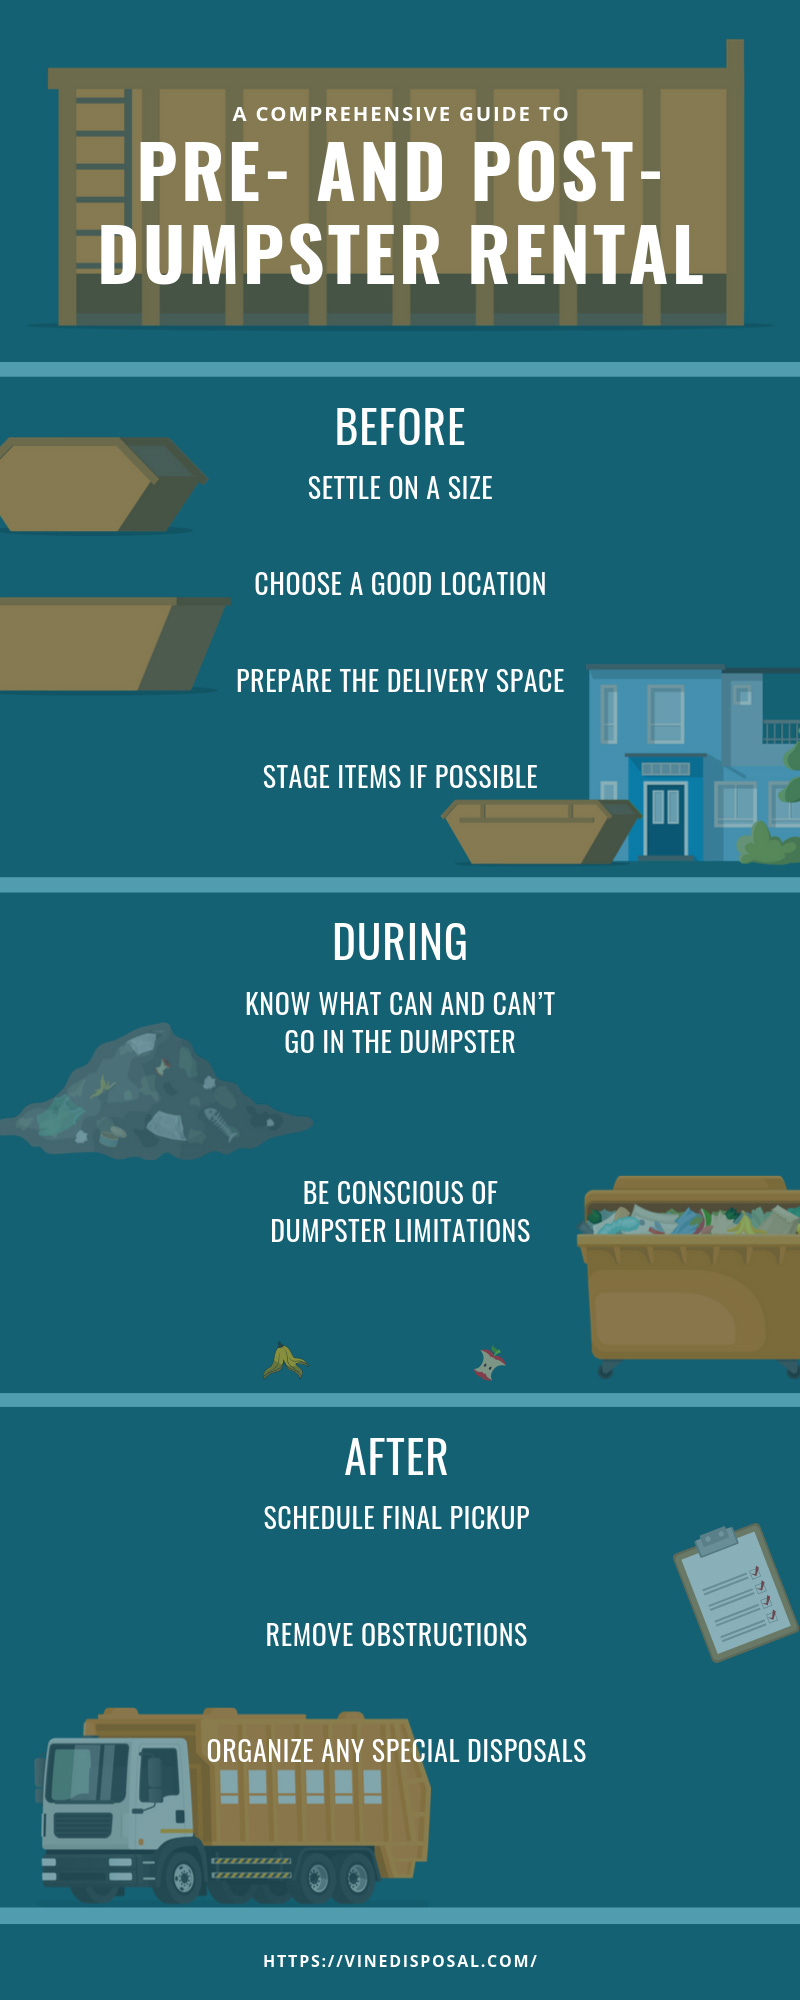 A Comprehensive Guide to Pre- and Post-Dumpster Rental